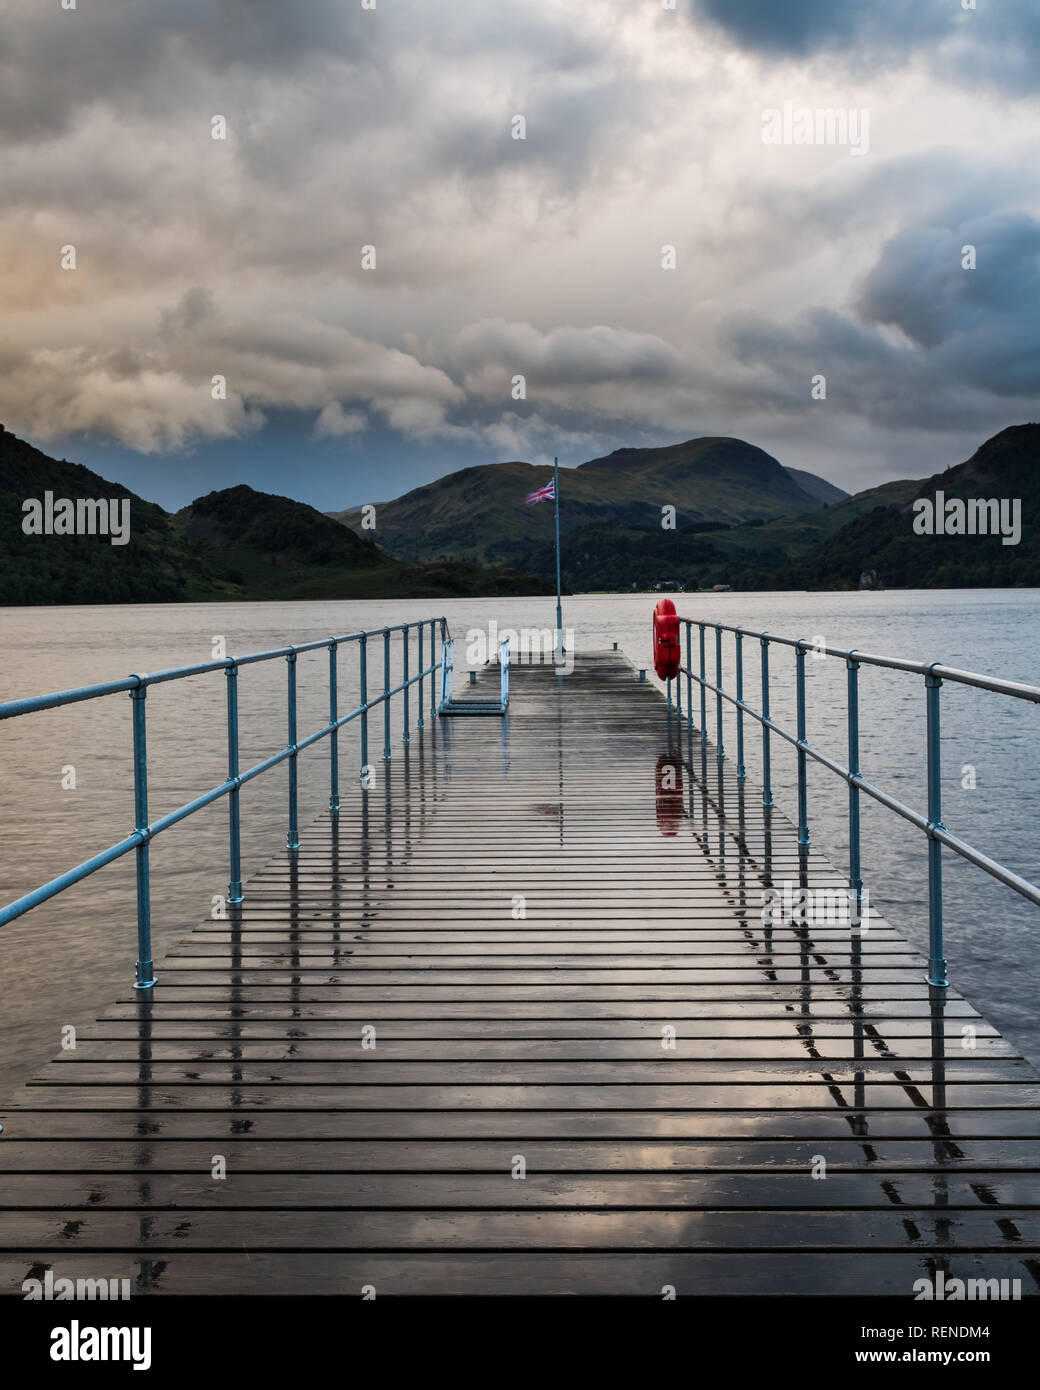 Aira Force jetty on Ullswater in the Lake District under stormy skies. Stock Photo